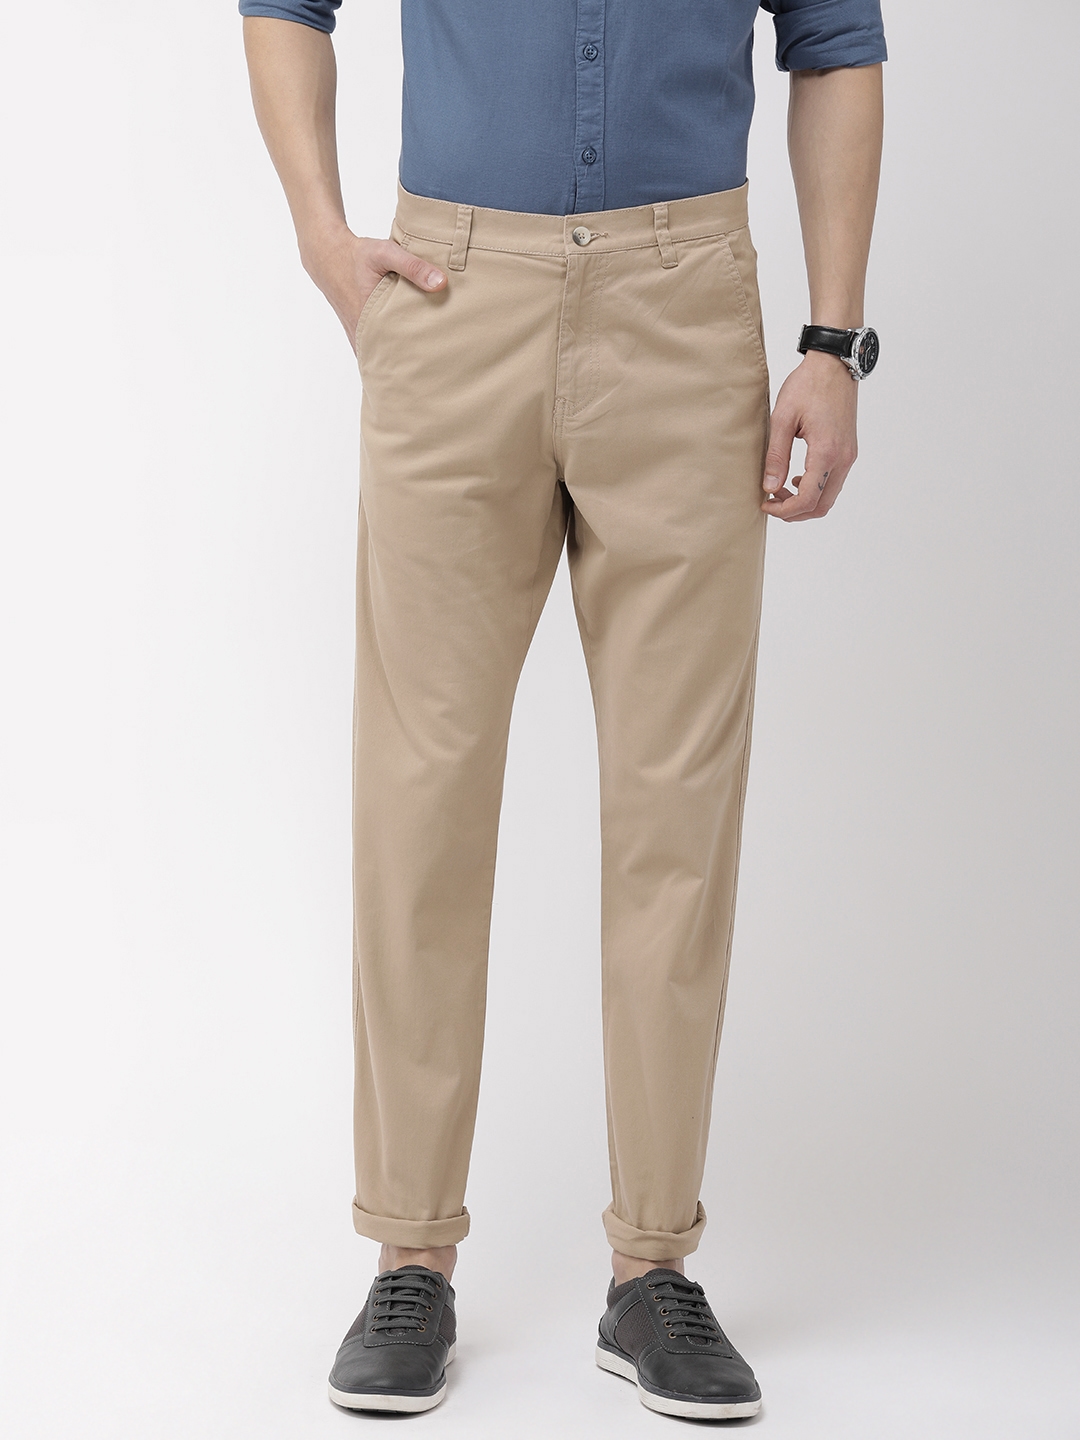 Aggregate more than 78 tan coloured trousers best - in.cdgdbentre